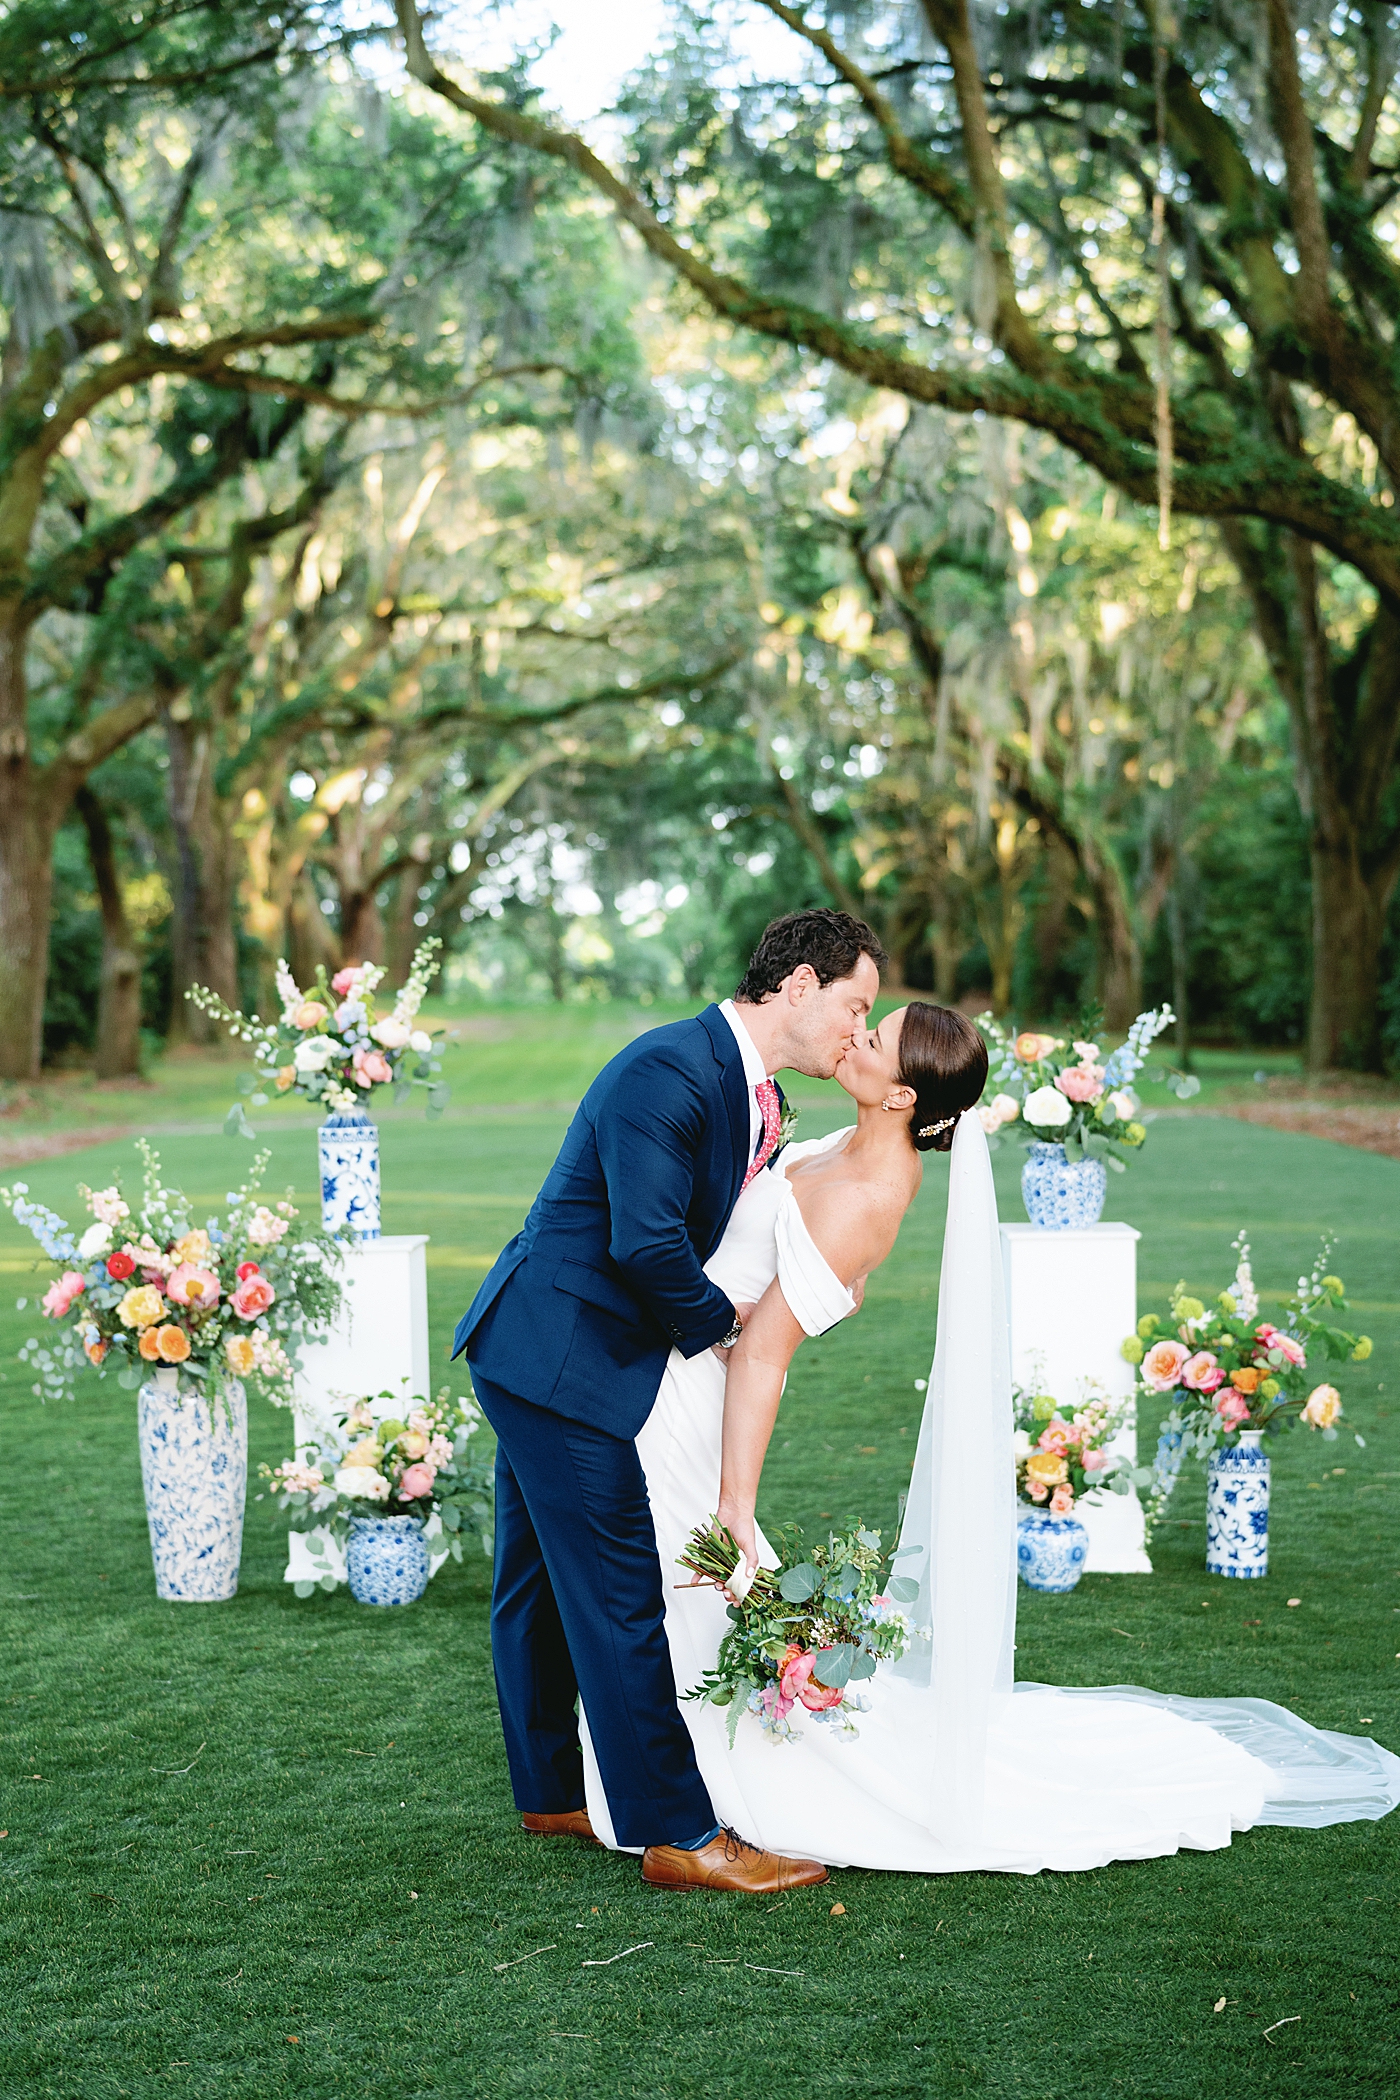 Bride and groom during their first kiss surrounded by colorful florals | Image by Annie Laura Photo